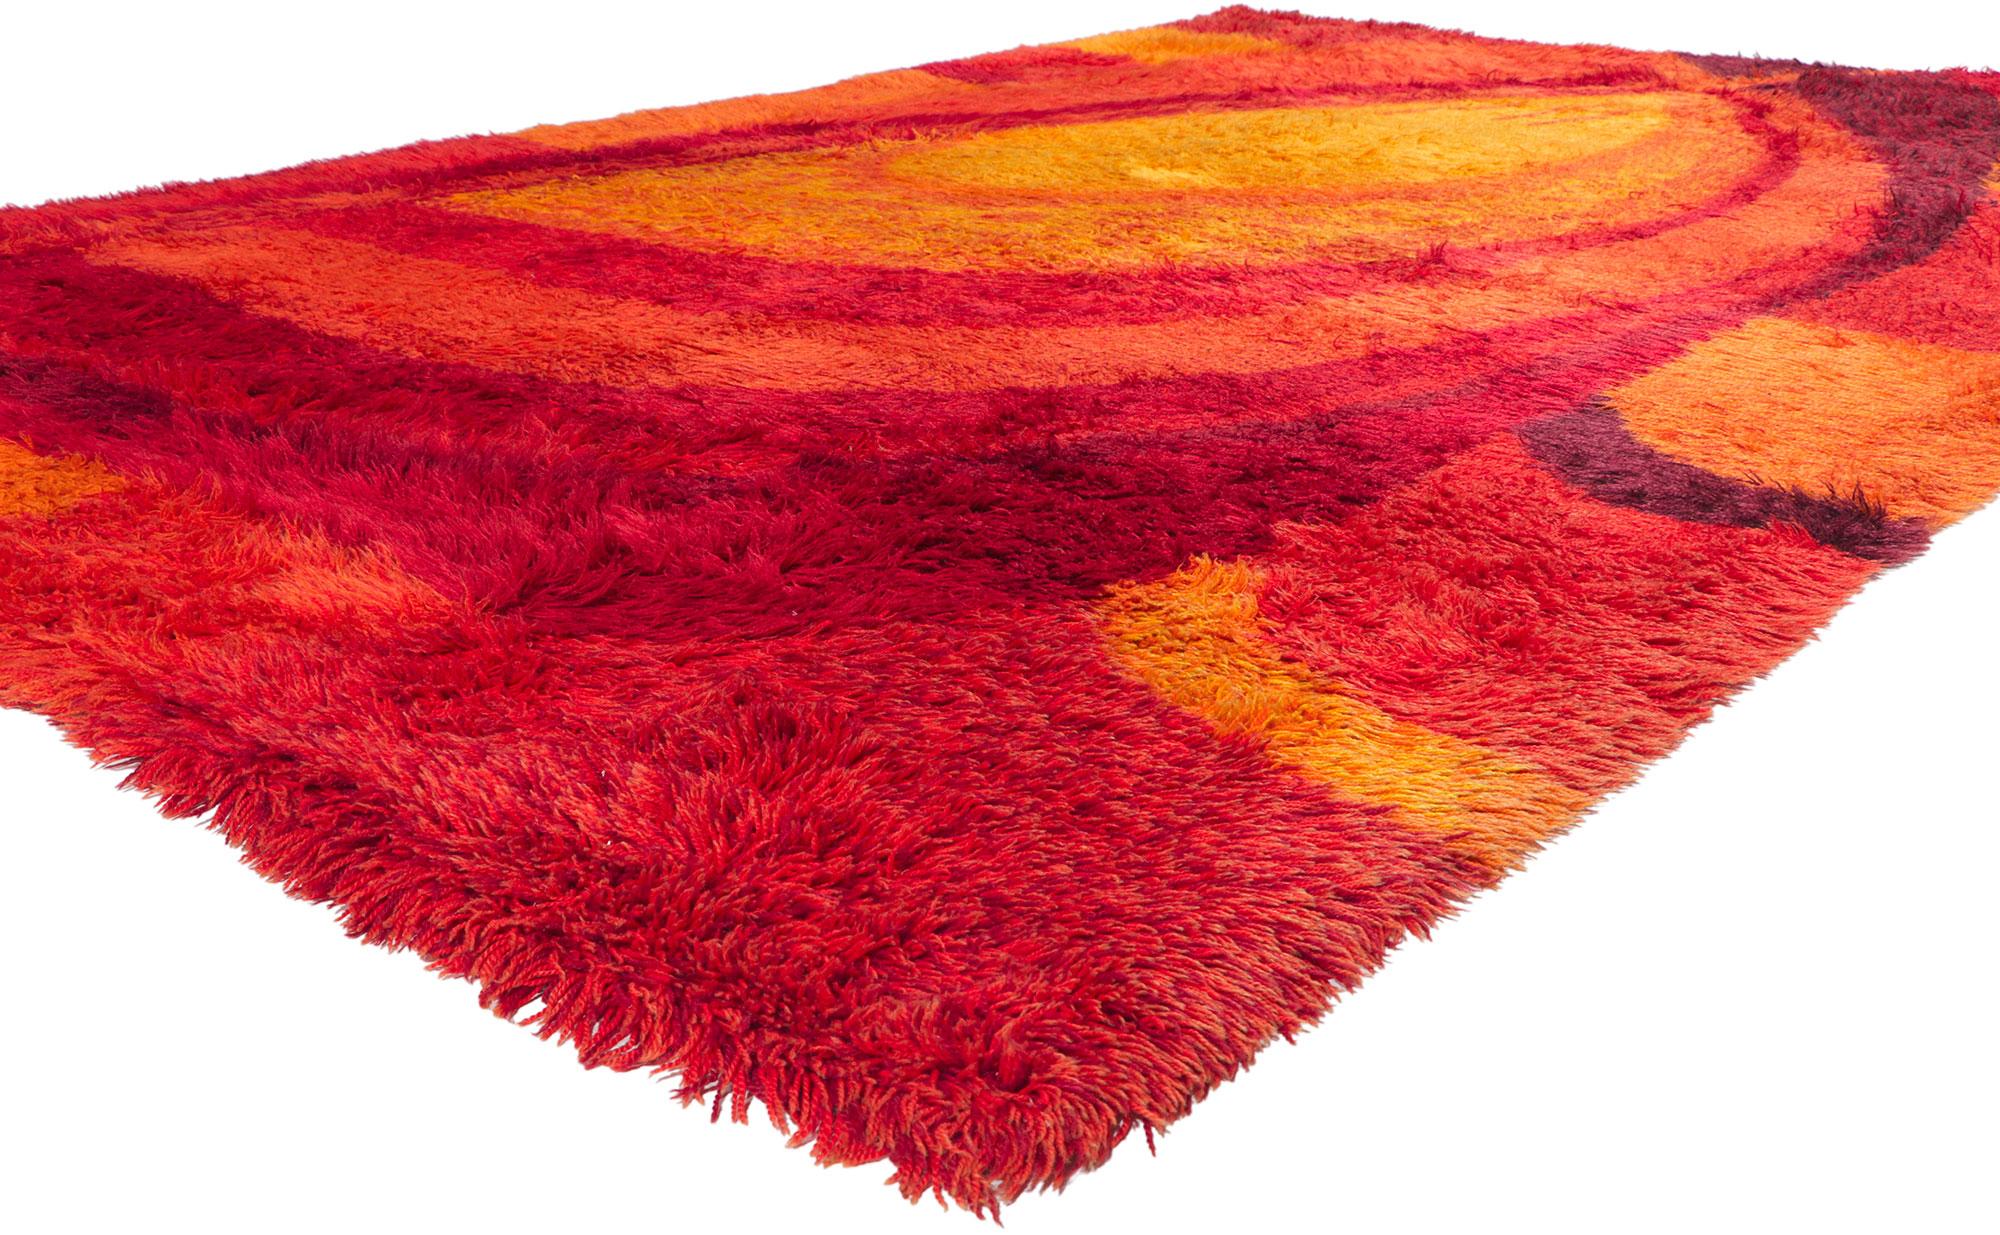 78352 Vintage Danish Rya Ege rug, 07'06 x 11'10. With its plush pile, incredible detail and texture, this hand knotted wool vintage Danish Rya rug is a captivating vision of woven beauty. The eye-catching abstract design and vibrant colors woven